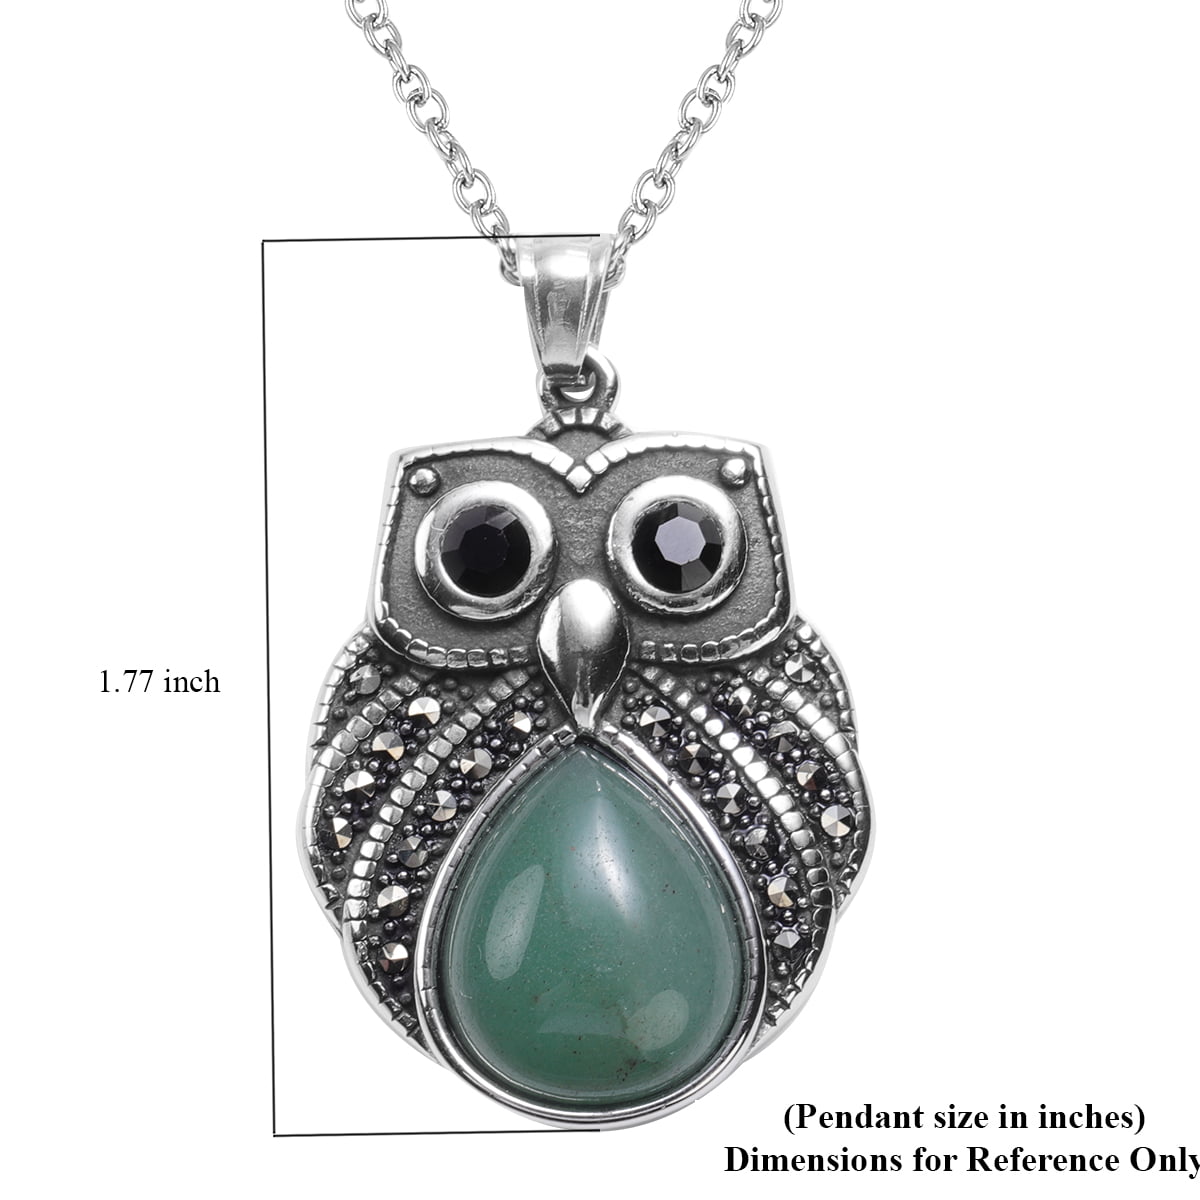 Green Aventurine Pendant Anxiety Relief Gemstones Necklace Silver Chain Gift